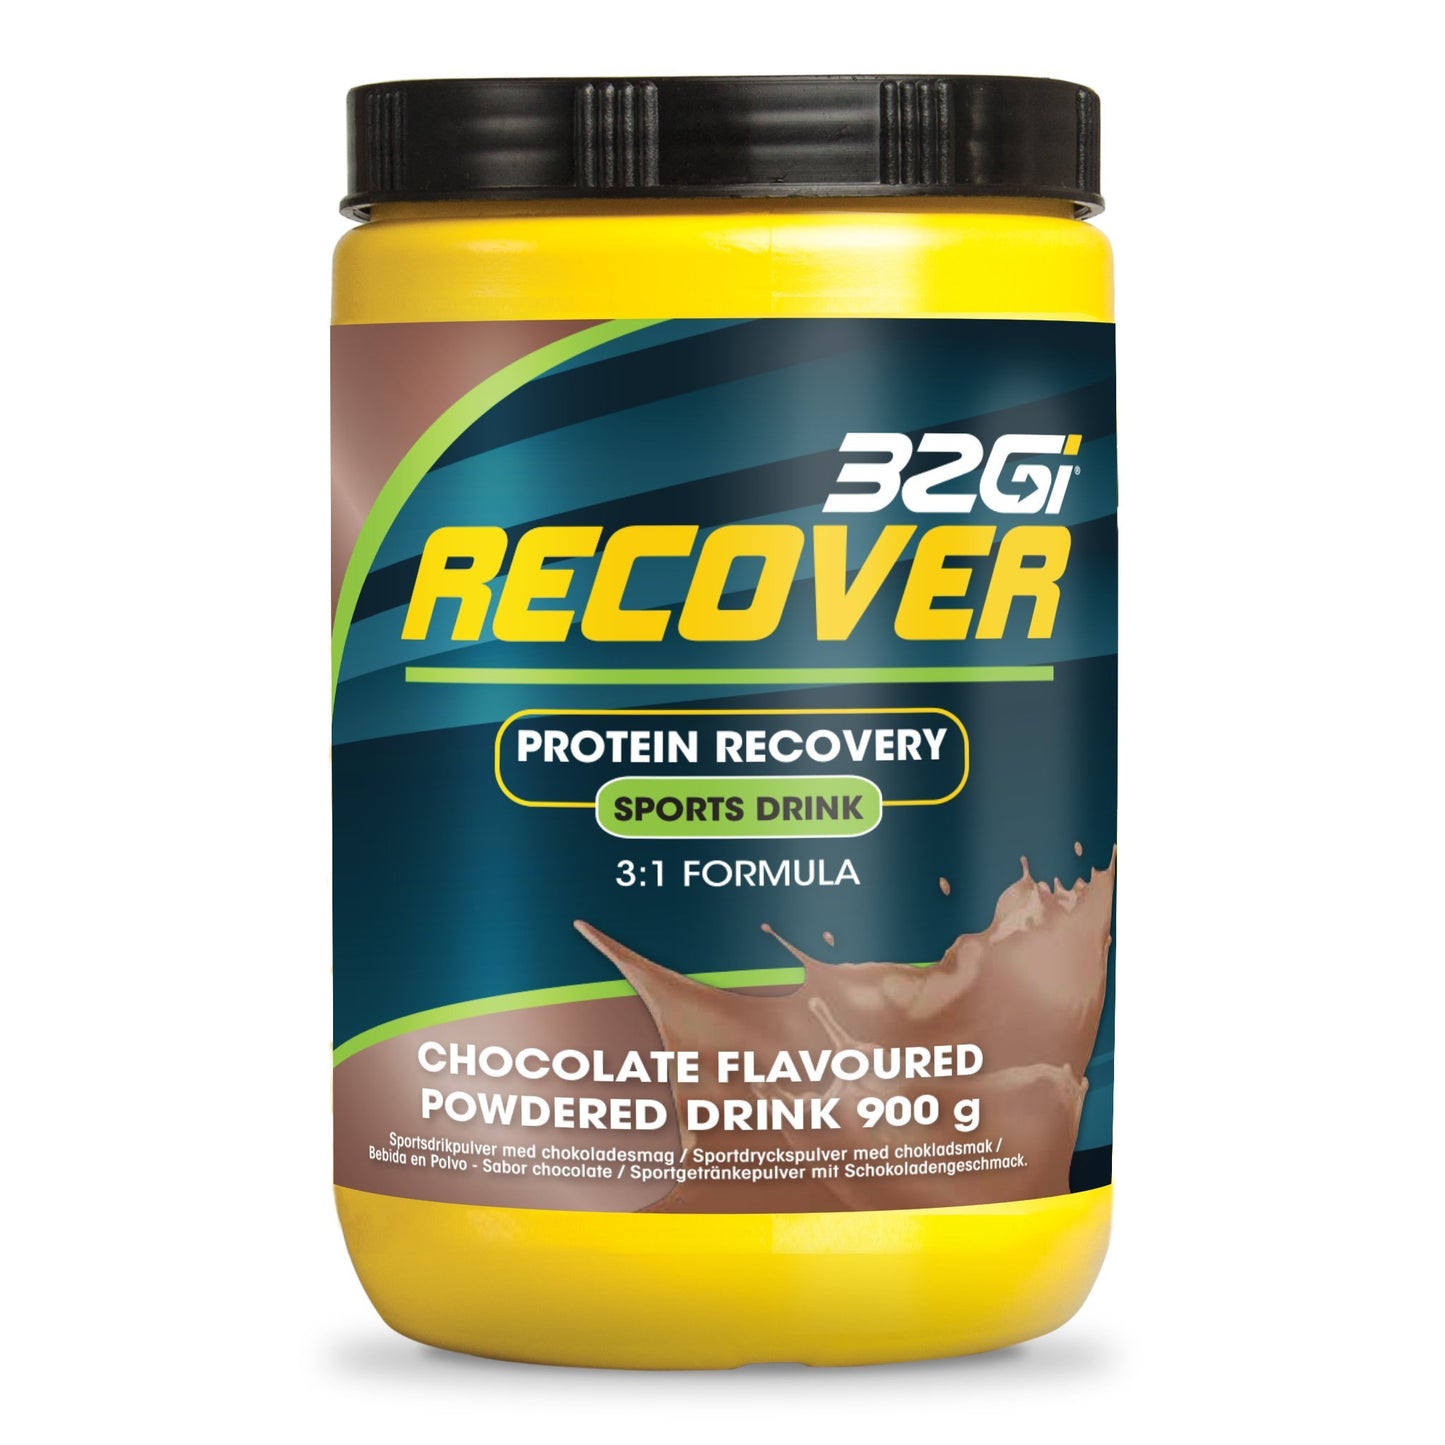 Recover - Carb 3:1 Protein with BCAAs - 32Gi United Kingdom